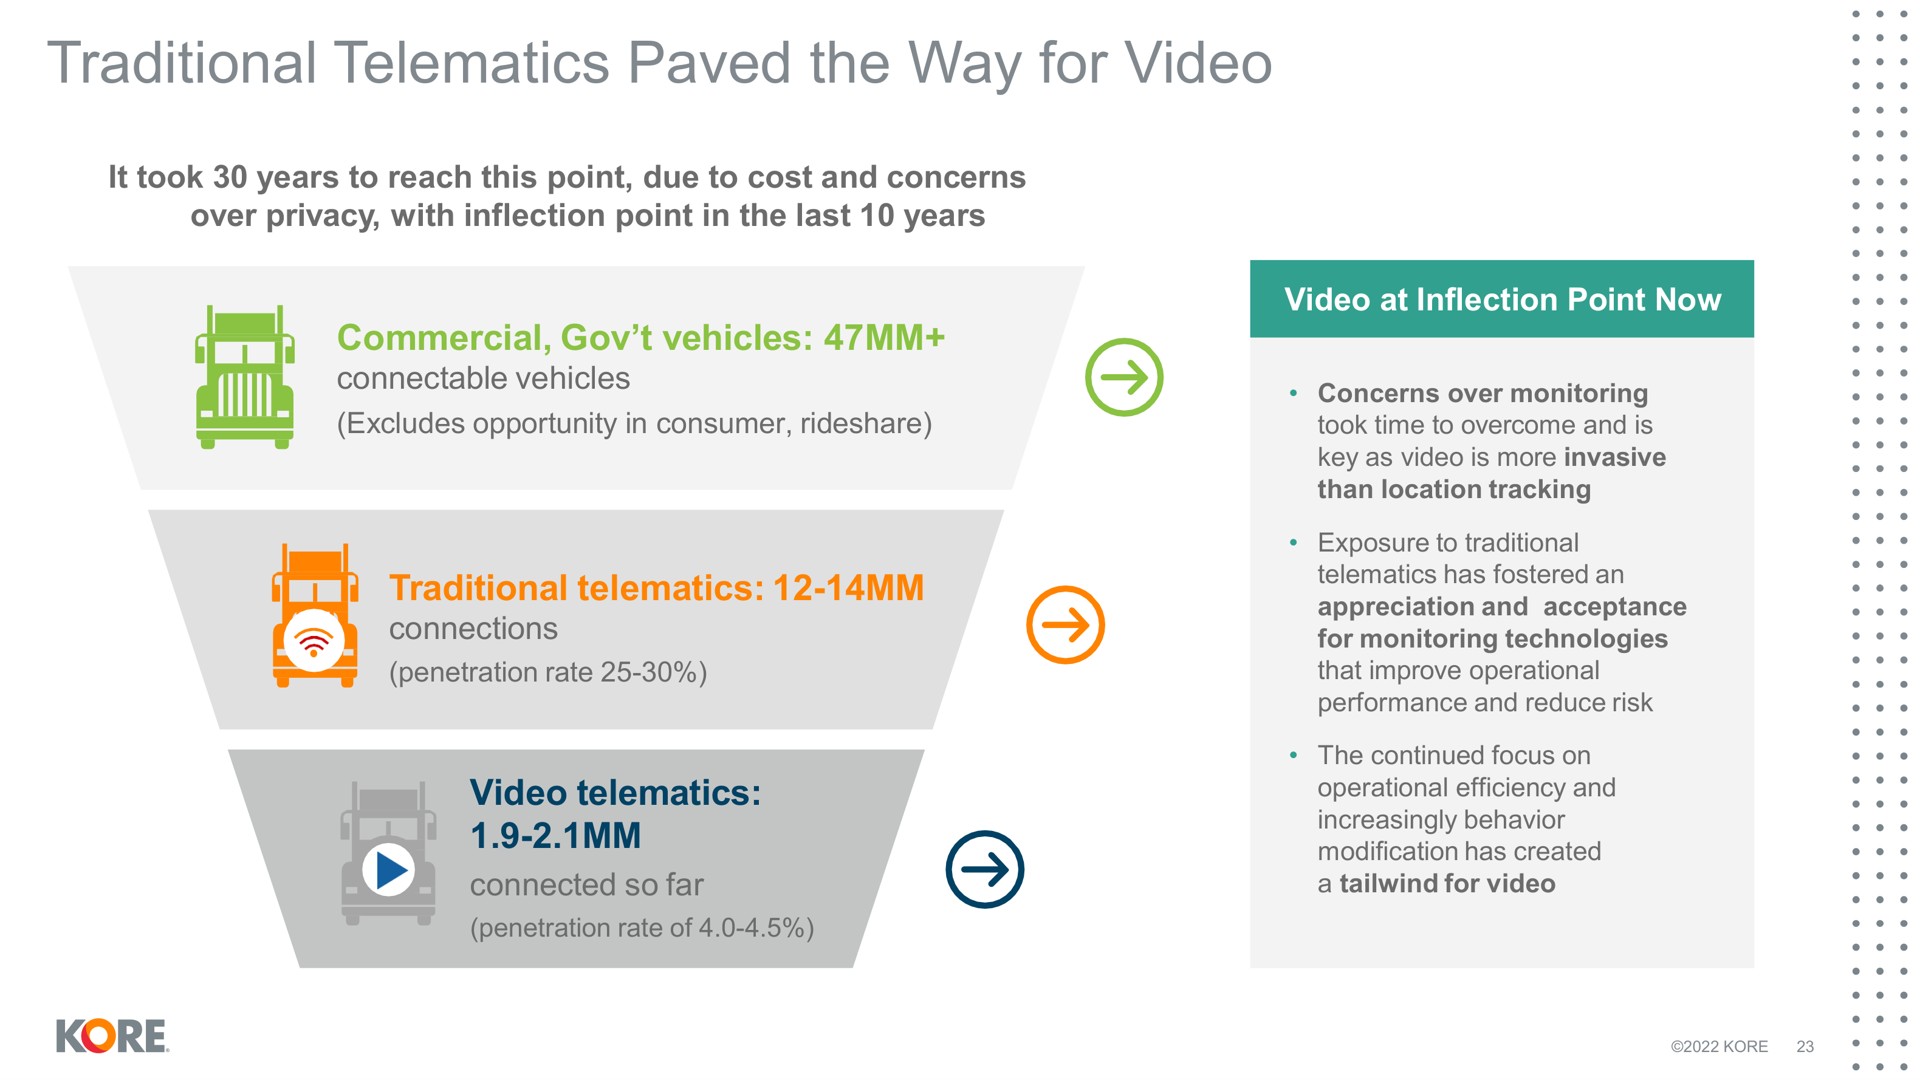 traditional paved the way for video has fostered an | Kore